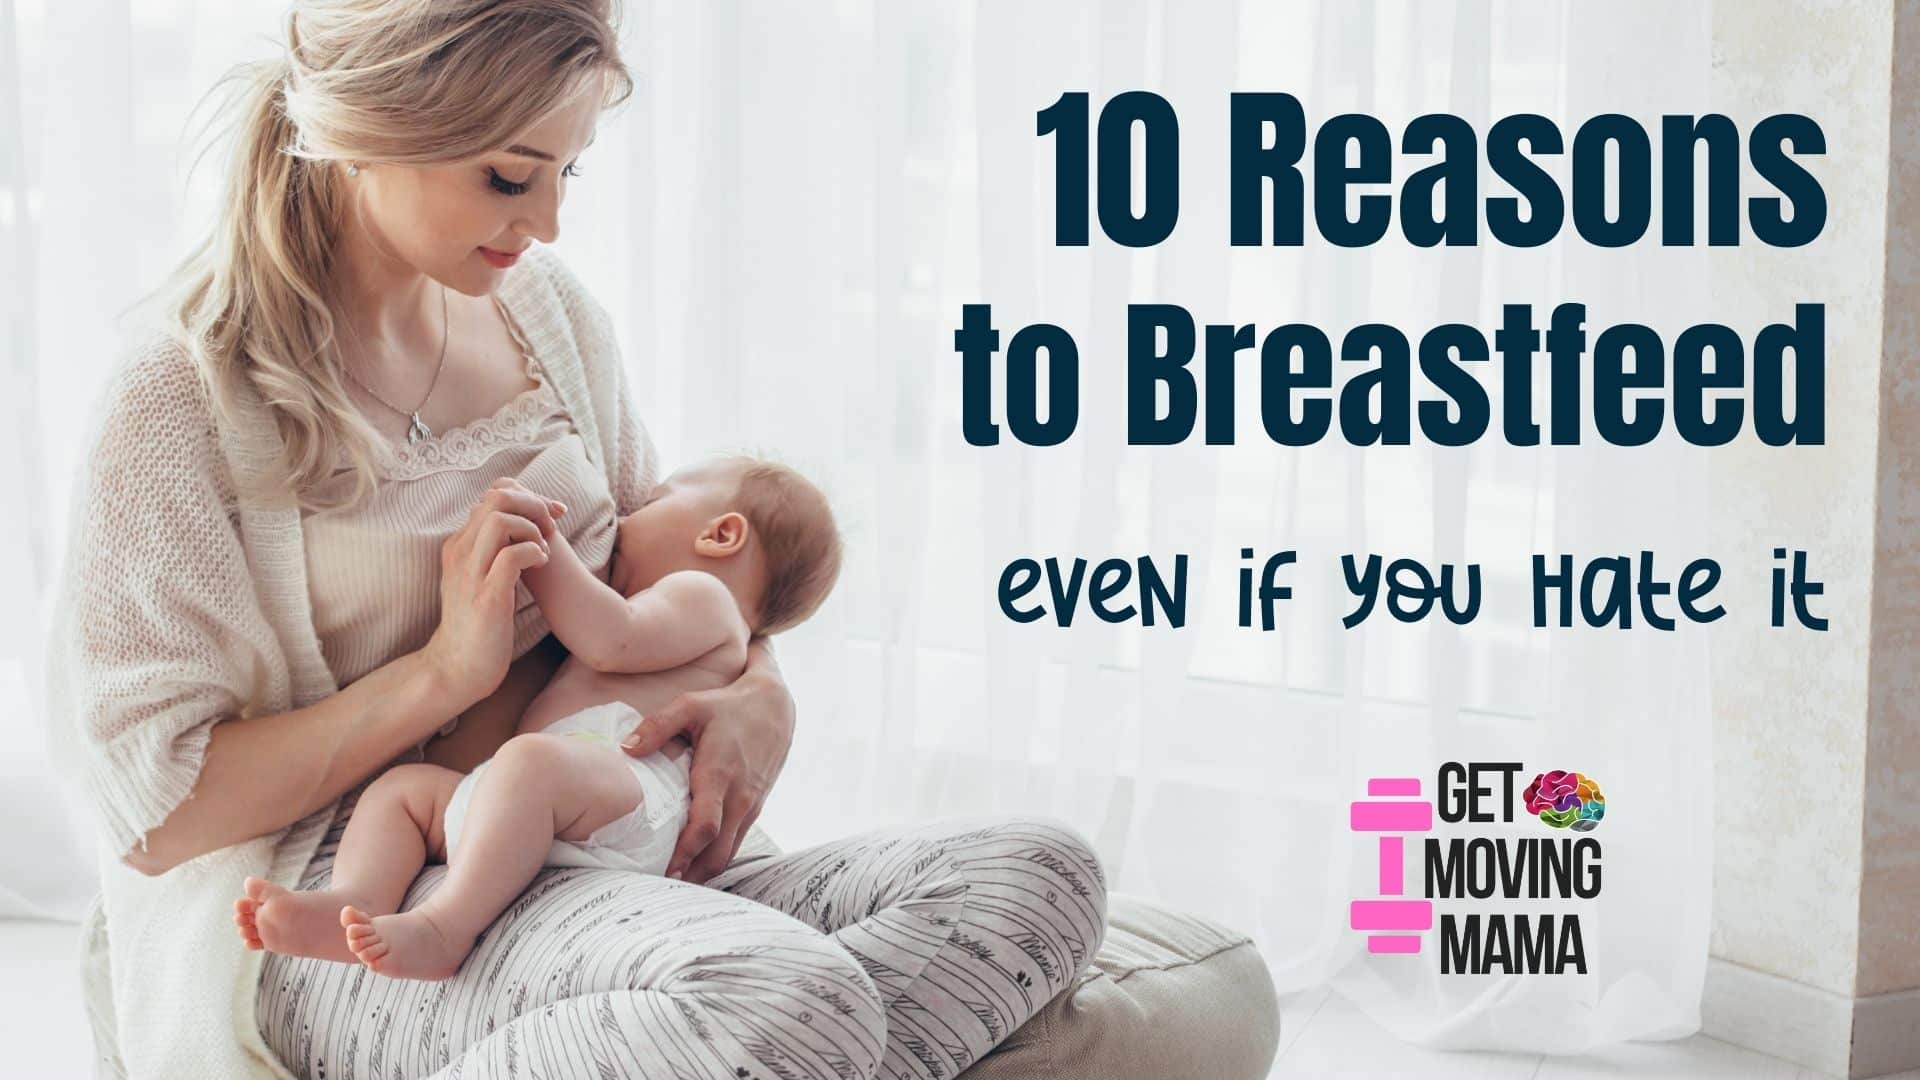 A picture of a mom breastfeeding a baby with 10 reasons to breastfeed in blue text.